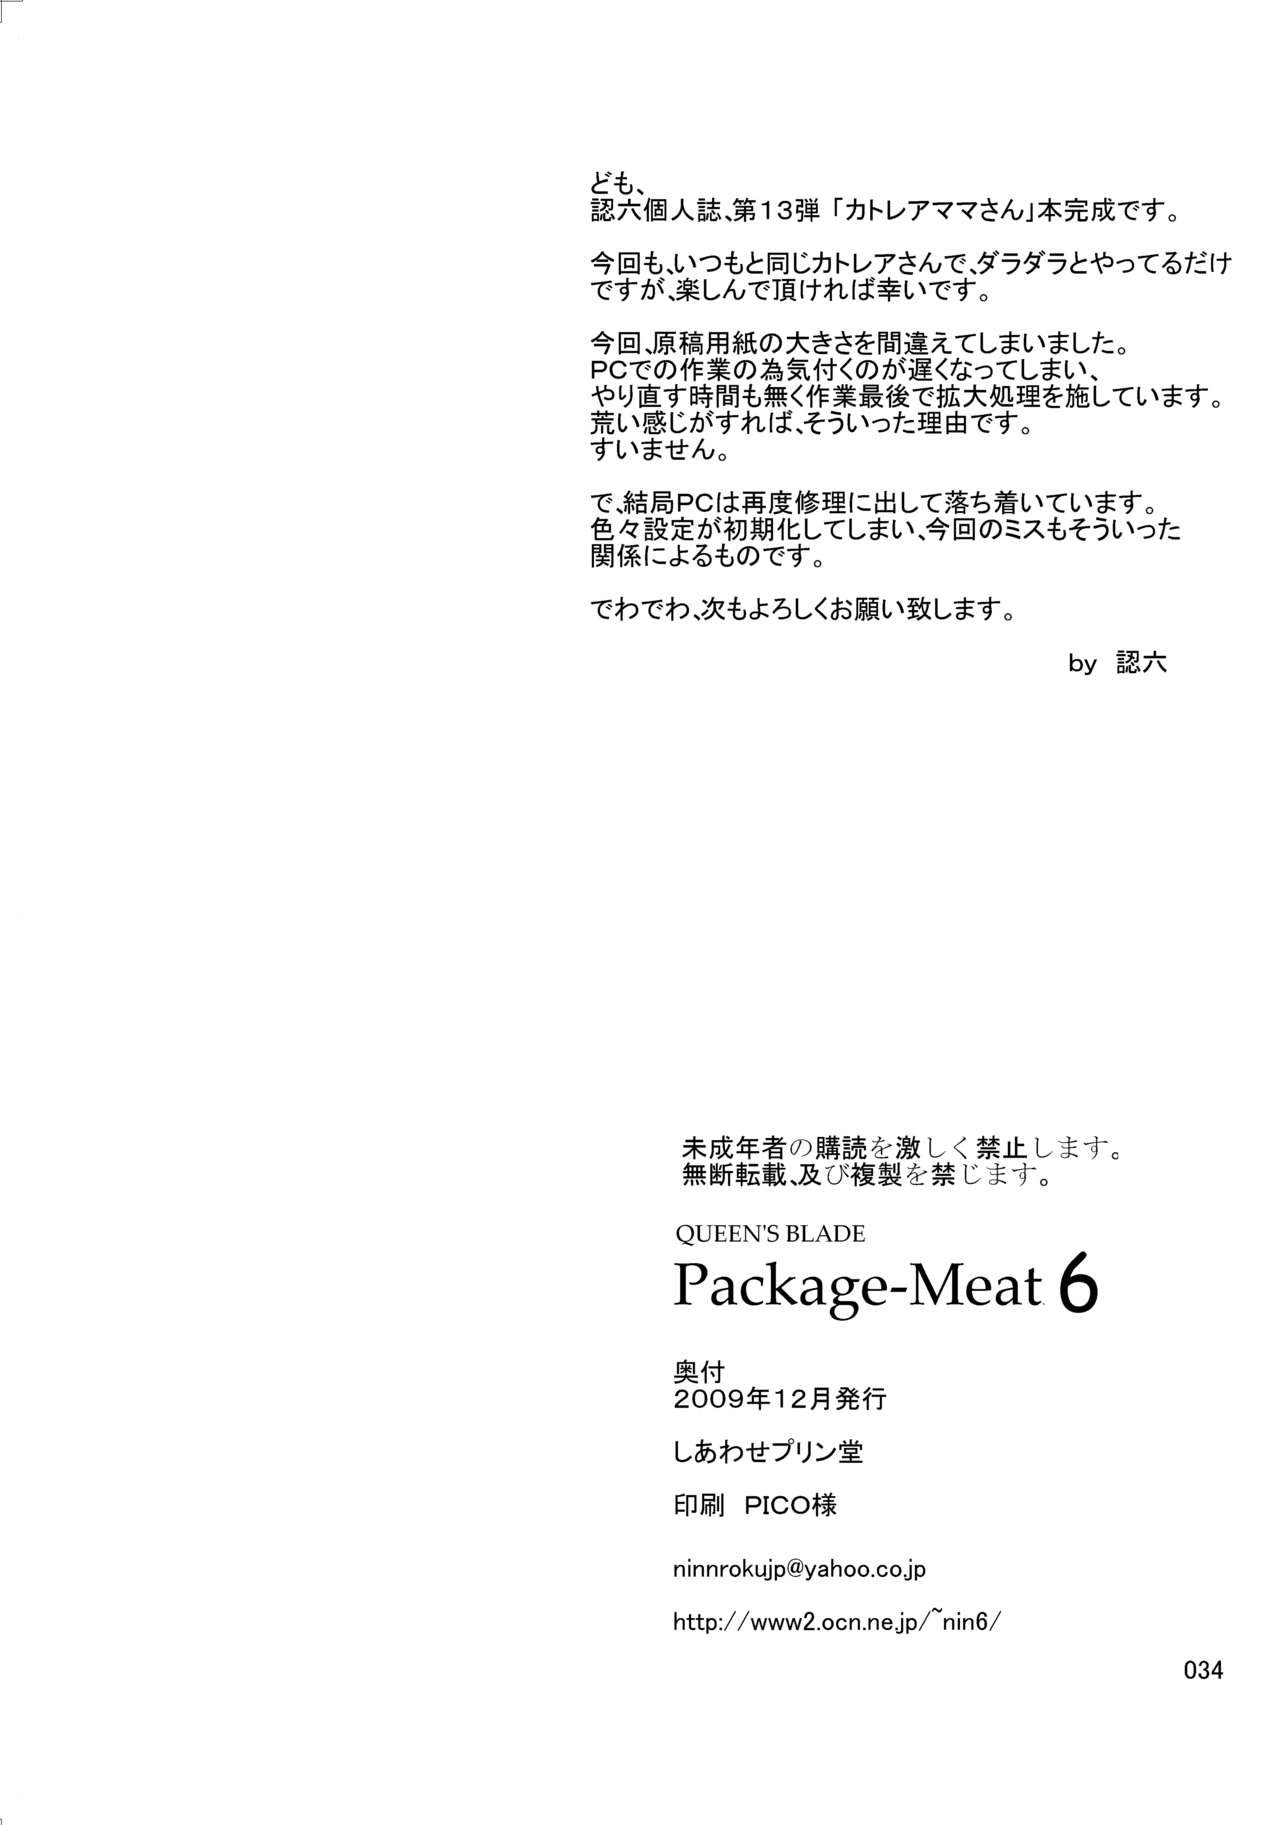 Package-Meat 6 numero d'image 33